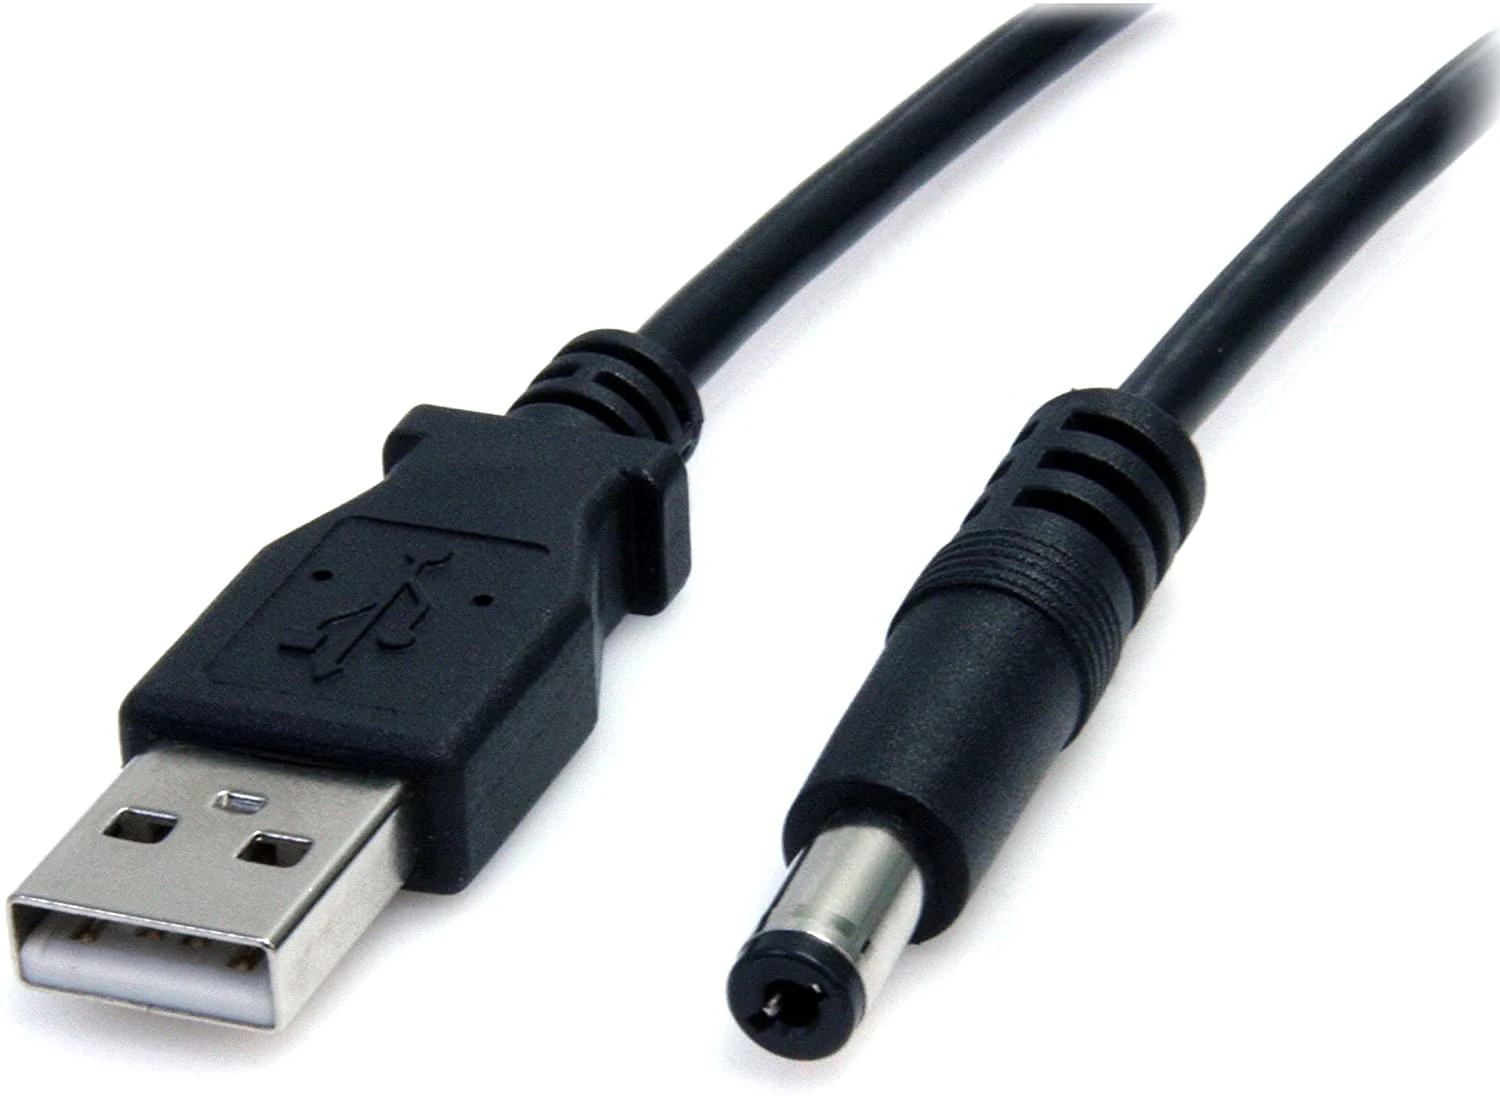 USB to 5.5mm Power Cable Connector Black USB to DC 5.5mm*2.1mm Power Converter Cable Cord